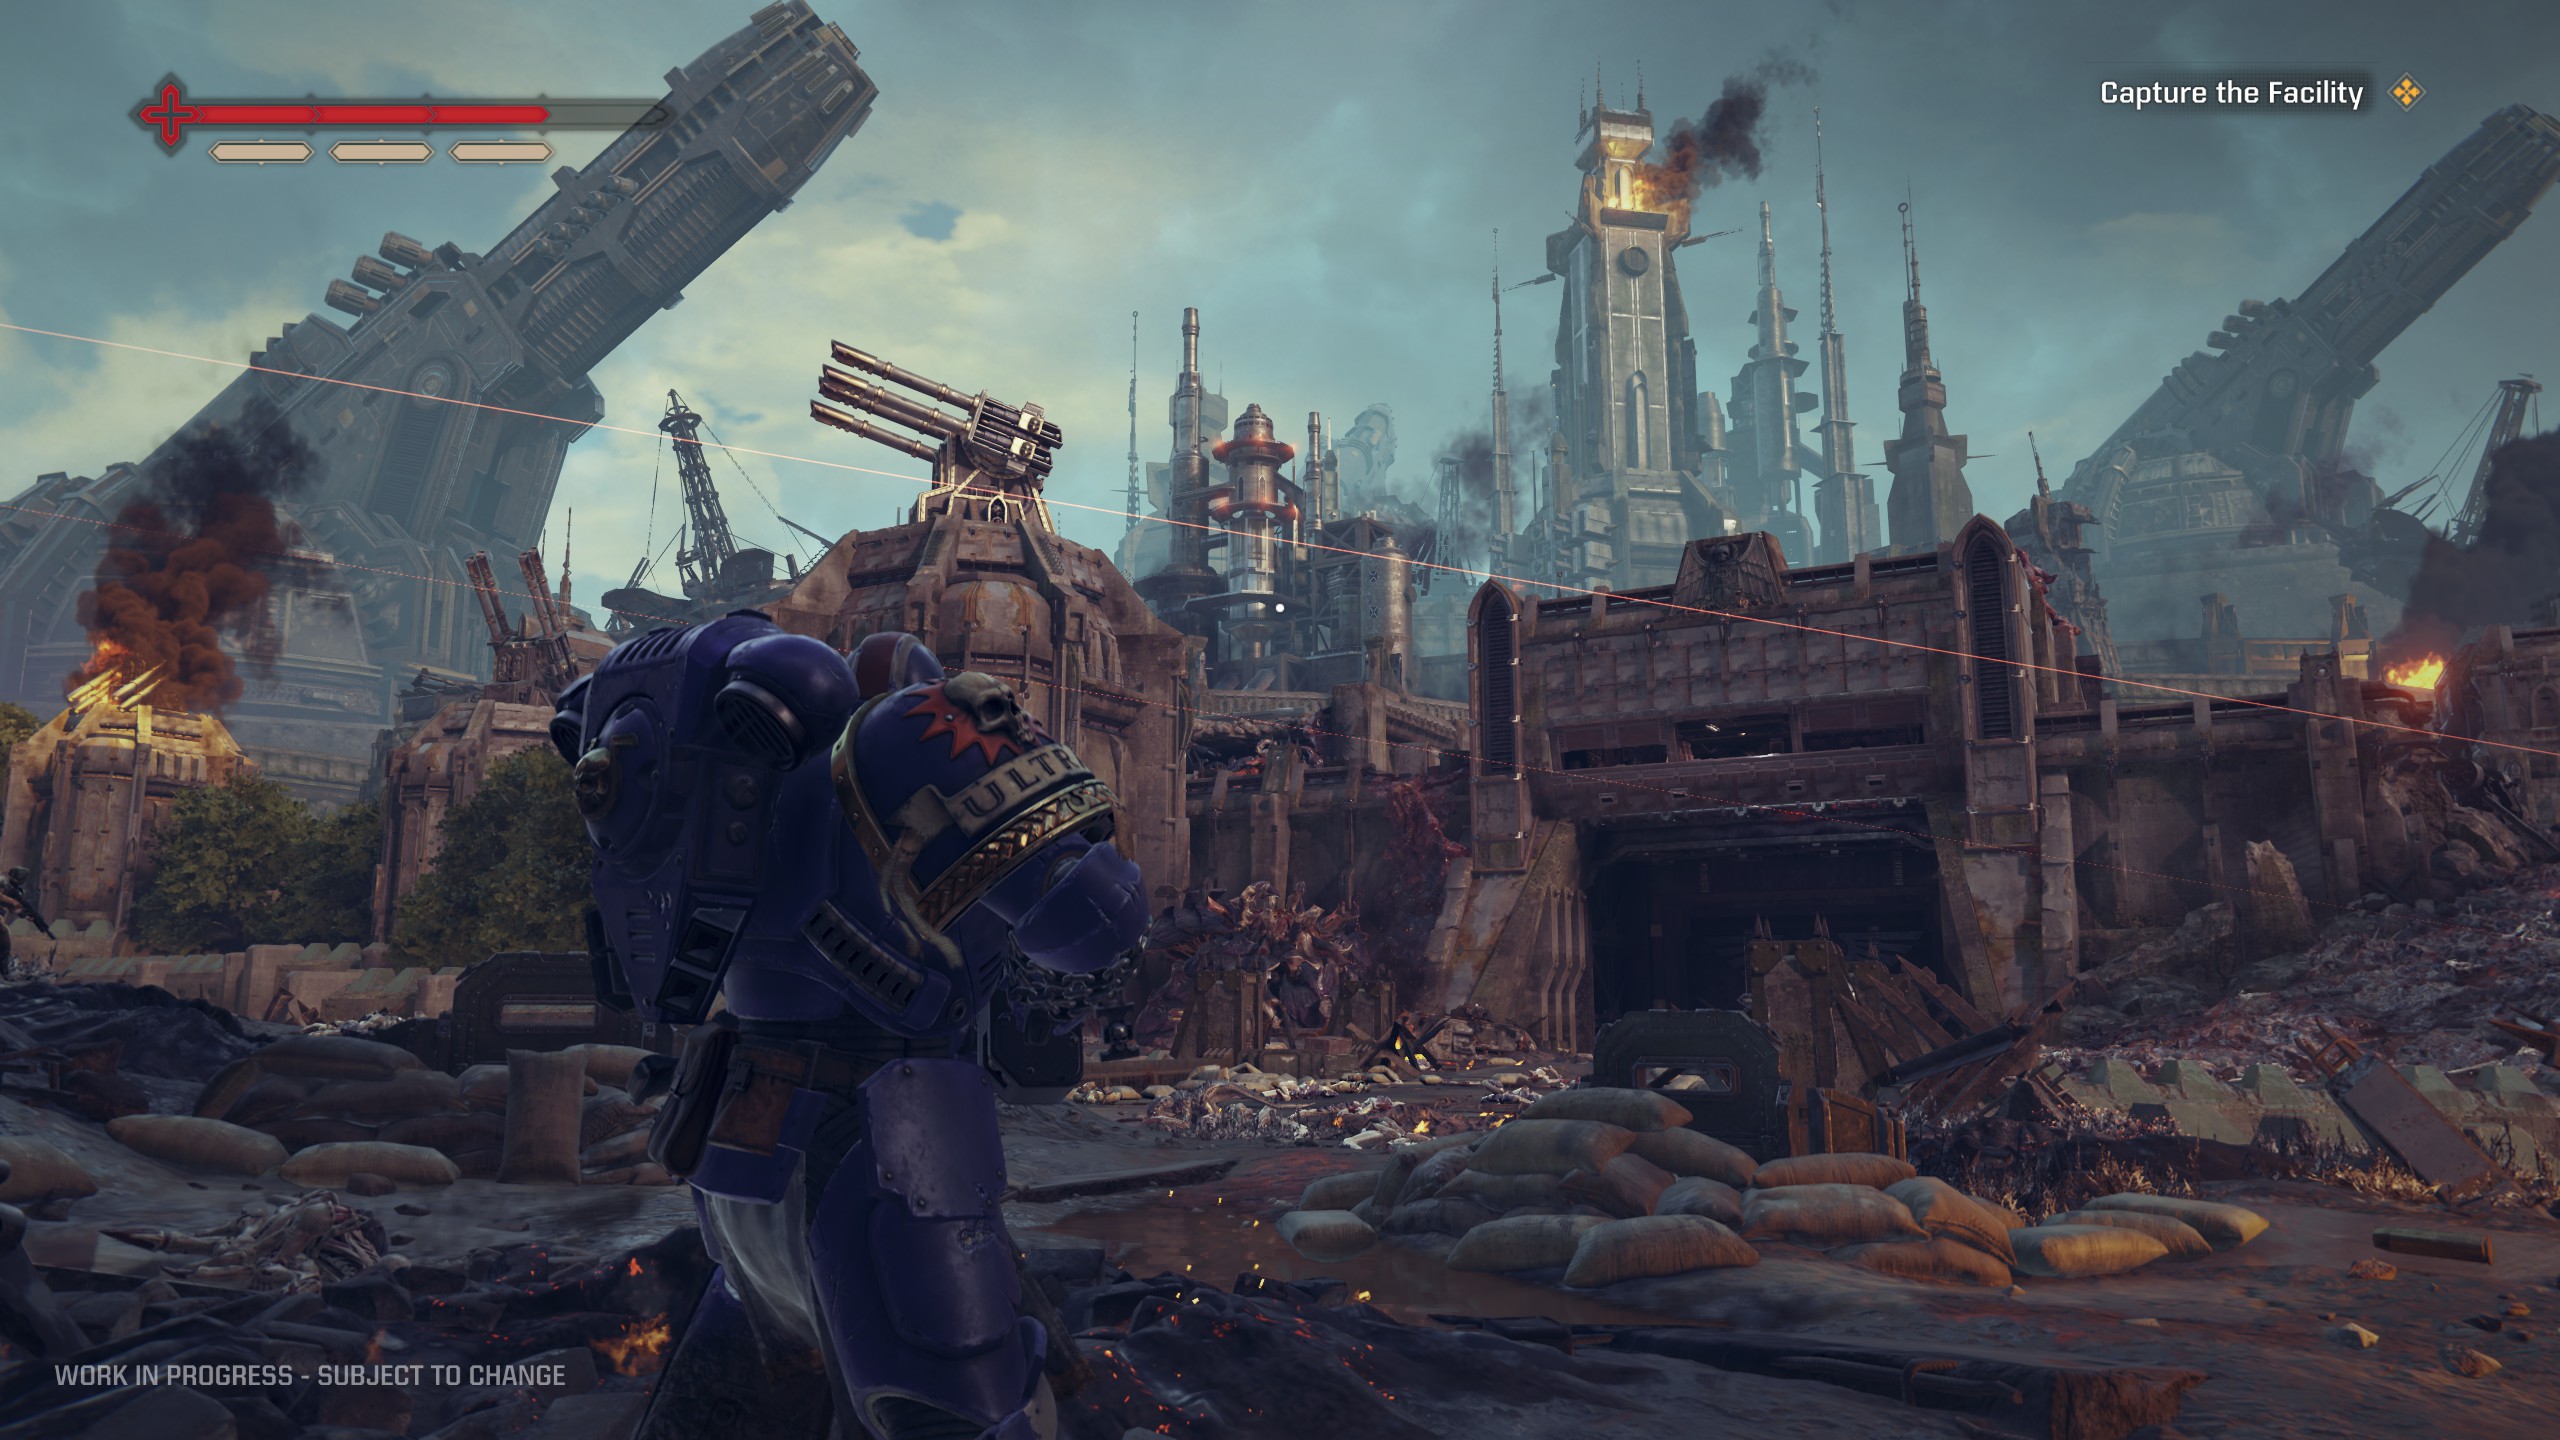 Space Marine looking up at refinery